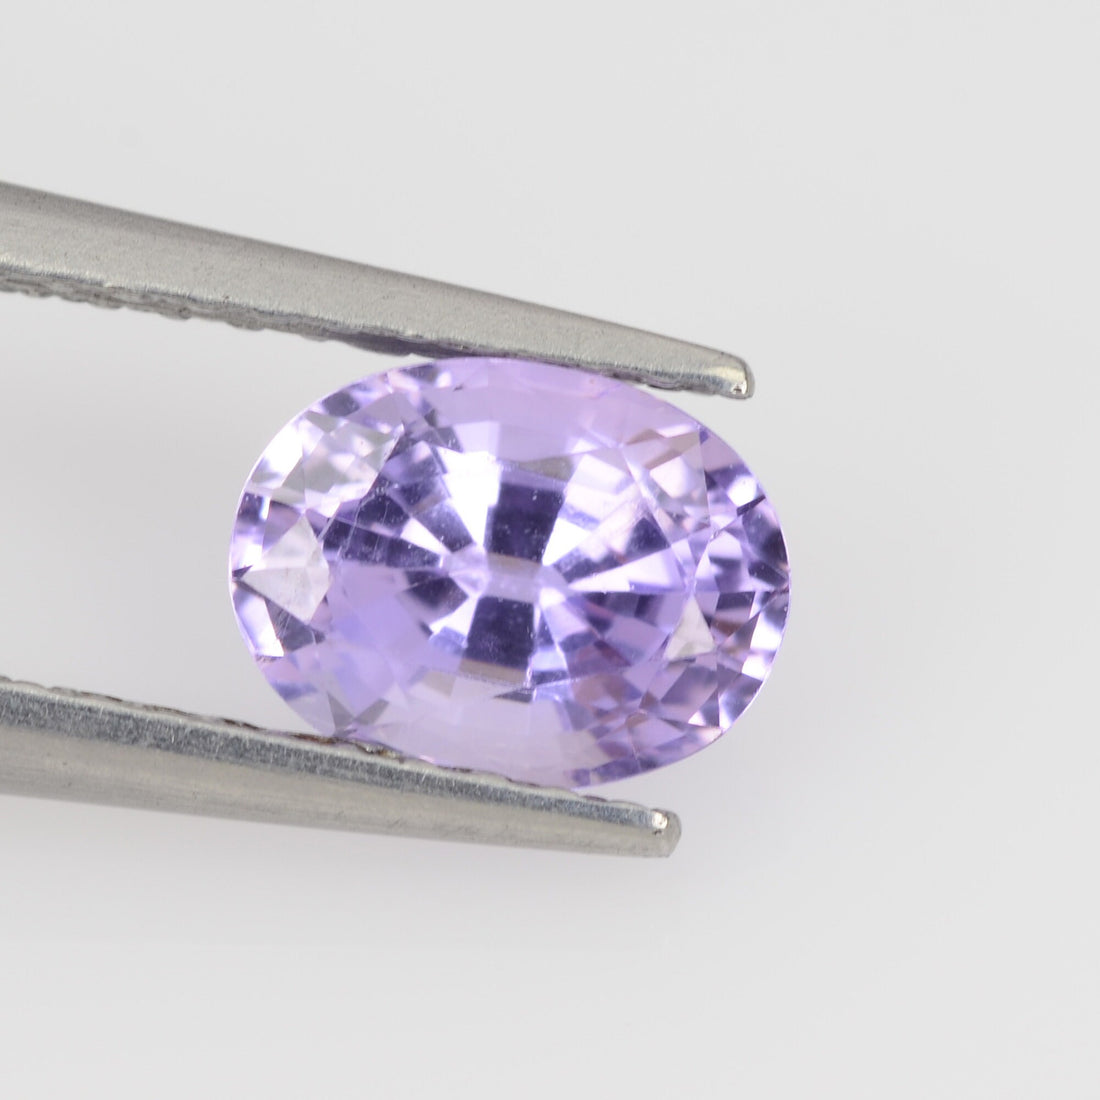 0.97 cts Natural Purple Sapphire Loose Gemstone Oval Cut